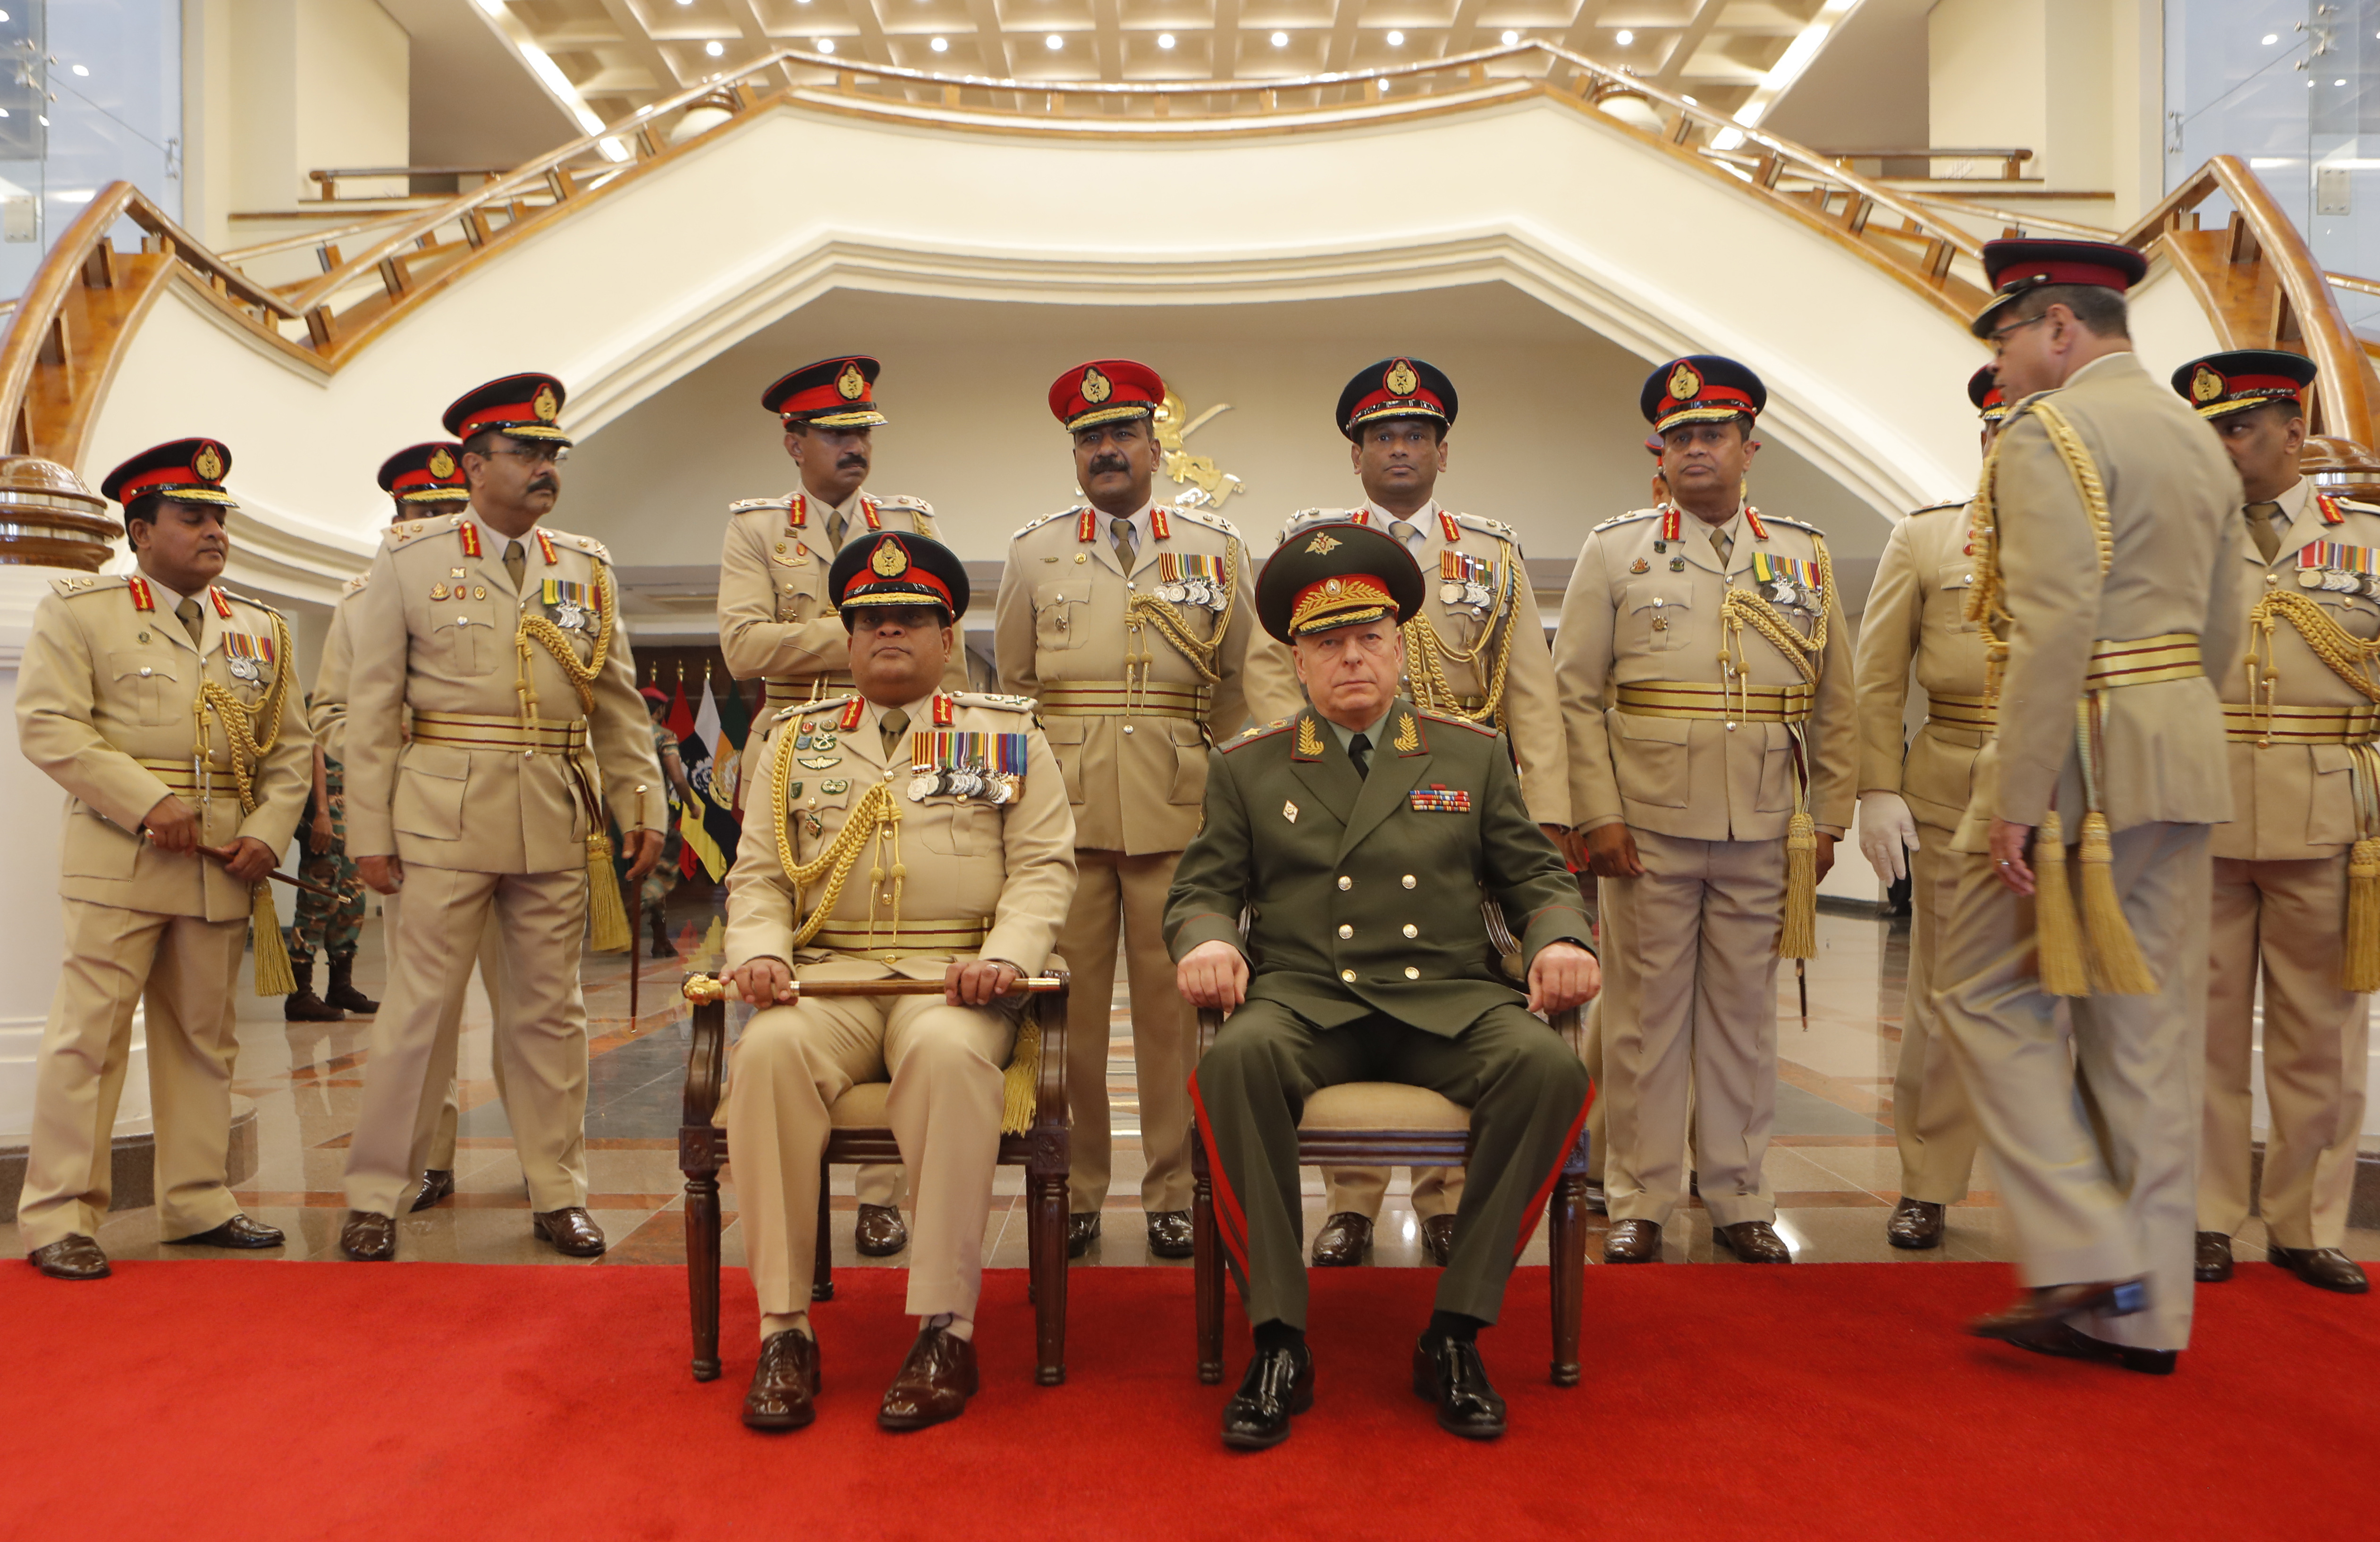 Lt. Gen. Shavendra Silva, seated left, along with his top command officers prepare to pose for a photograph with Russian Commander-in-Chief of the Ground Forces Colonel-General Oleg Salyukov at the military head quarters in Colombo